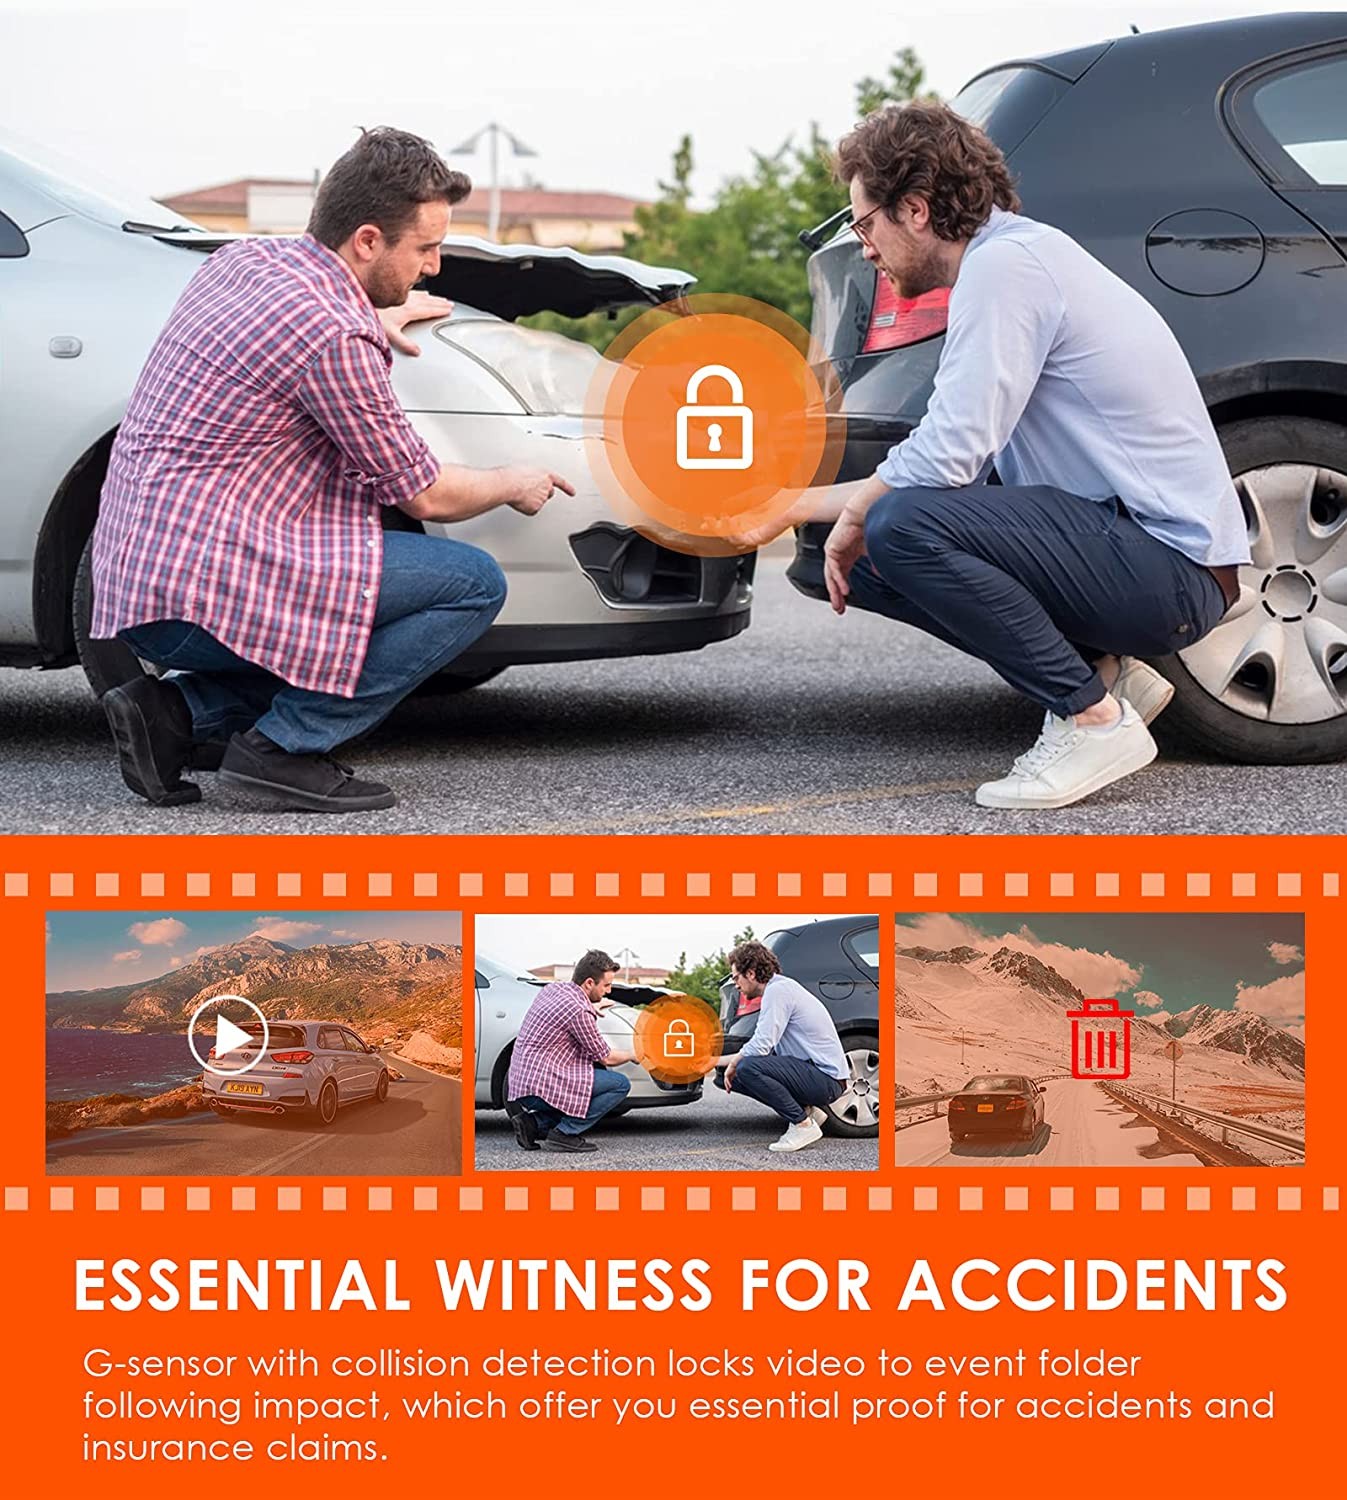 How Dash Cams Help in the Event of a Car Accident / Collision